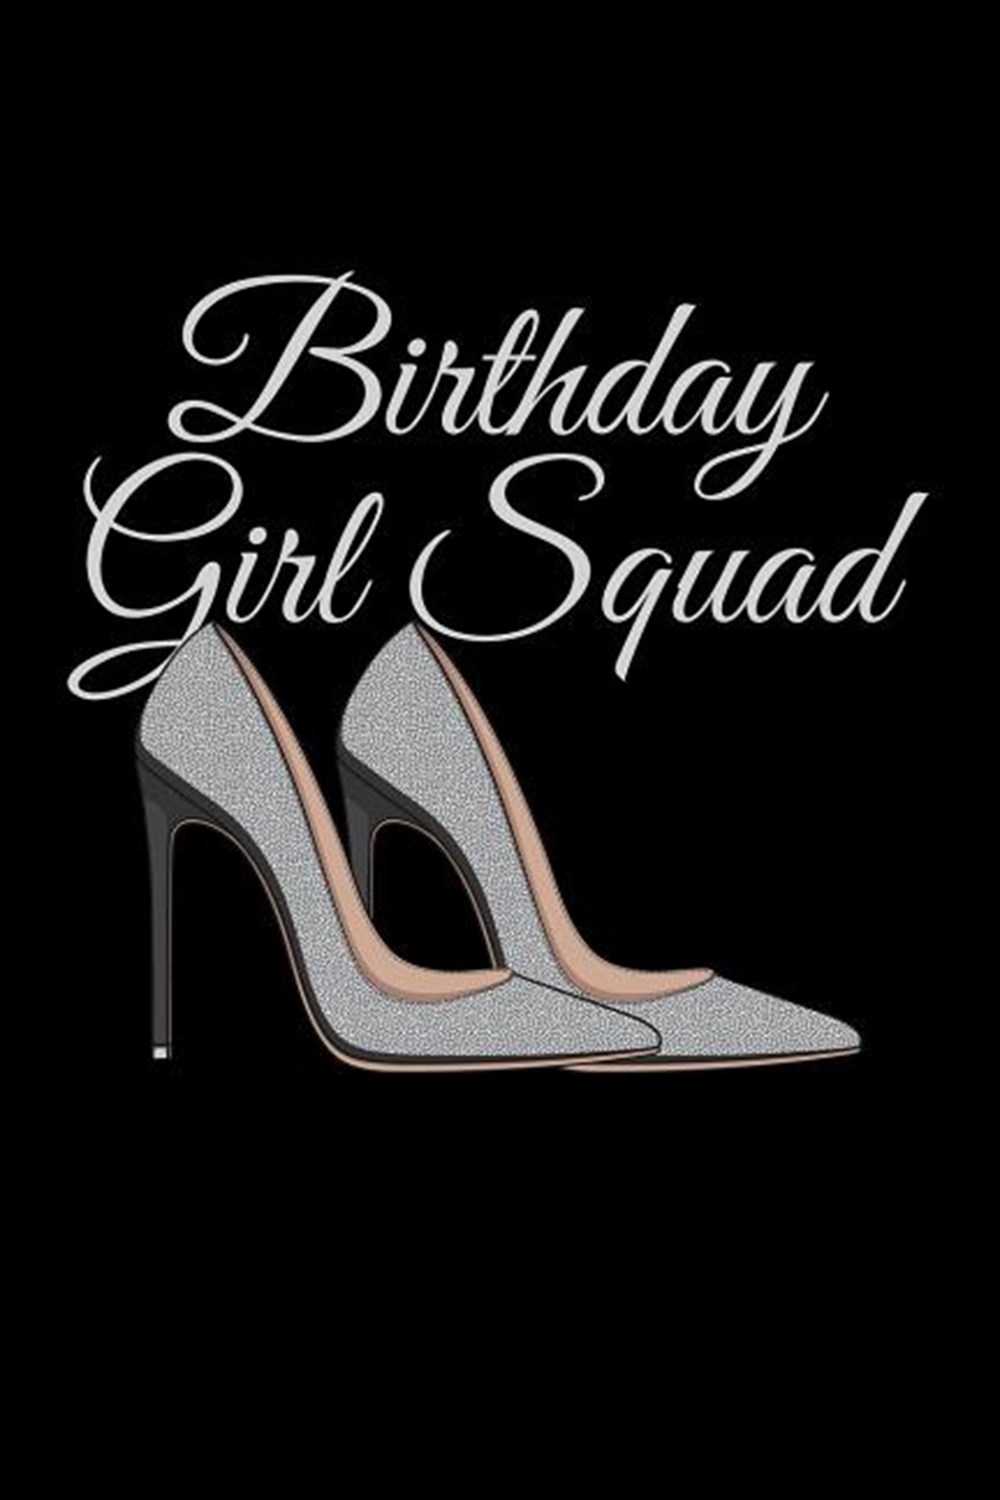 Birthday Girl Squad Blank Paper Sketch Book - Artist Sketch Pad Journal for Sketching, Doodling, Dra